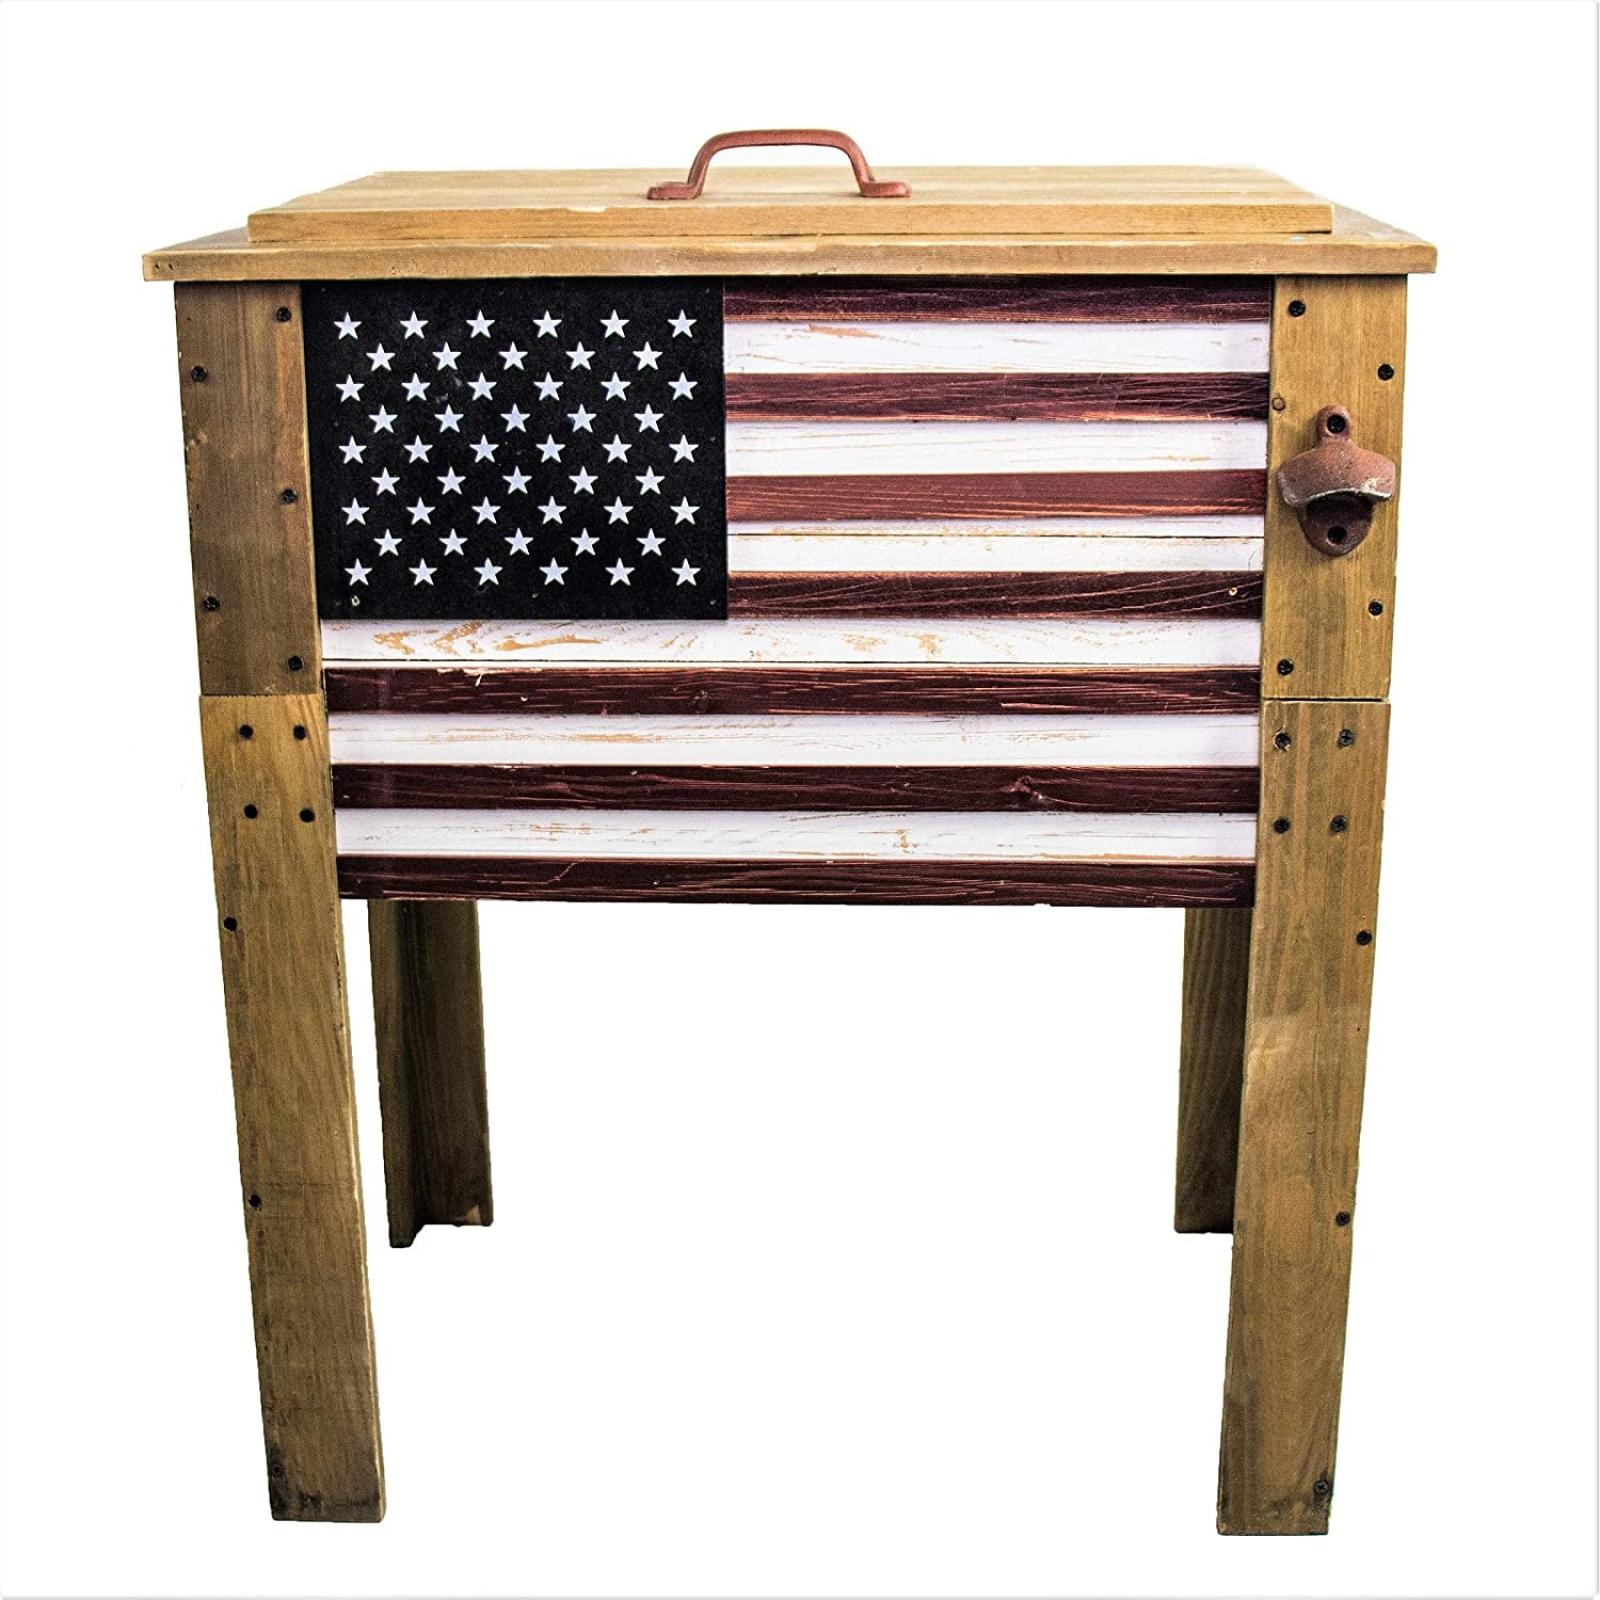 Backyard Expressions Outdoor Patio Wooden American Flag Cooler